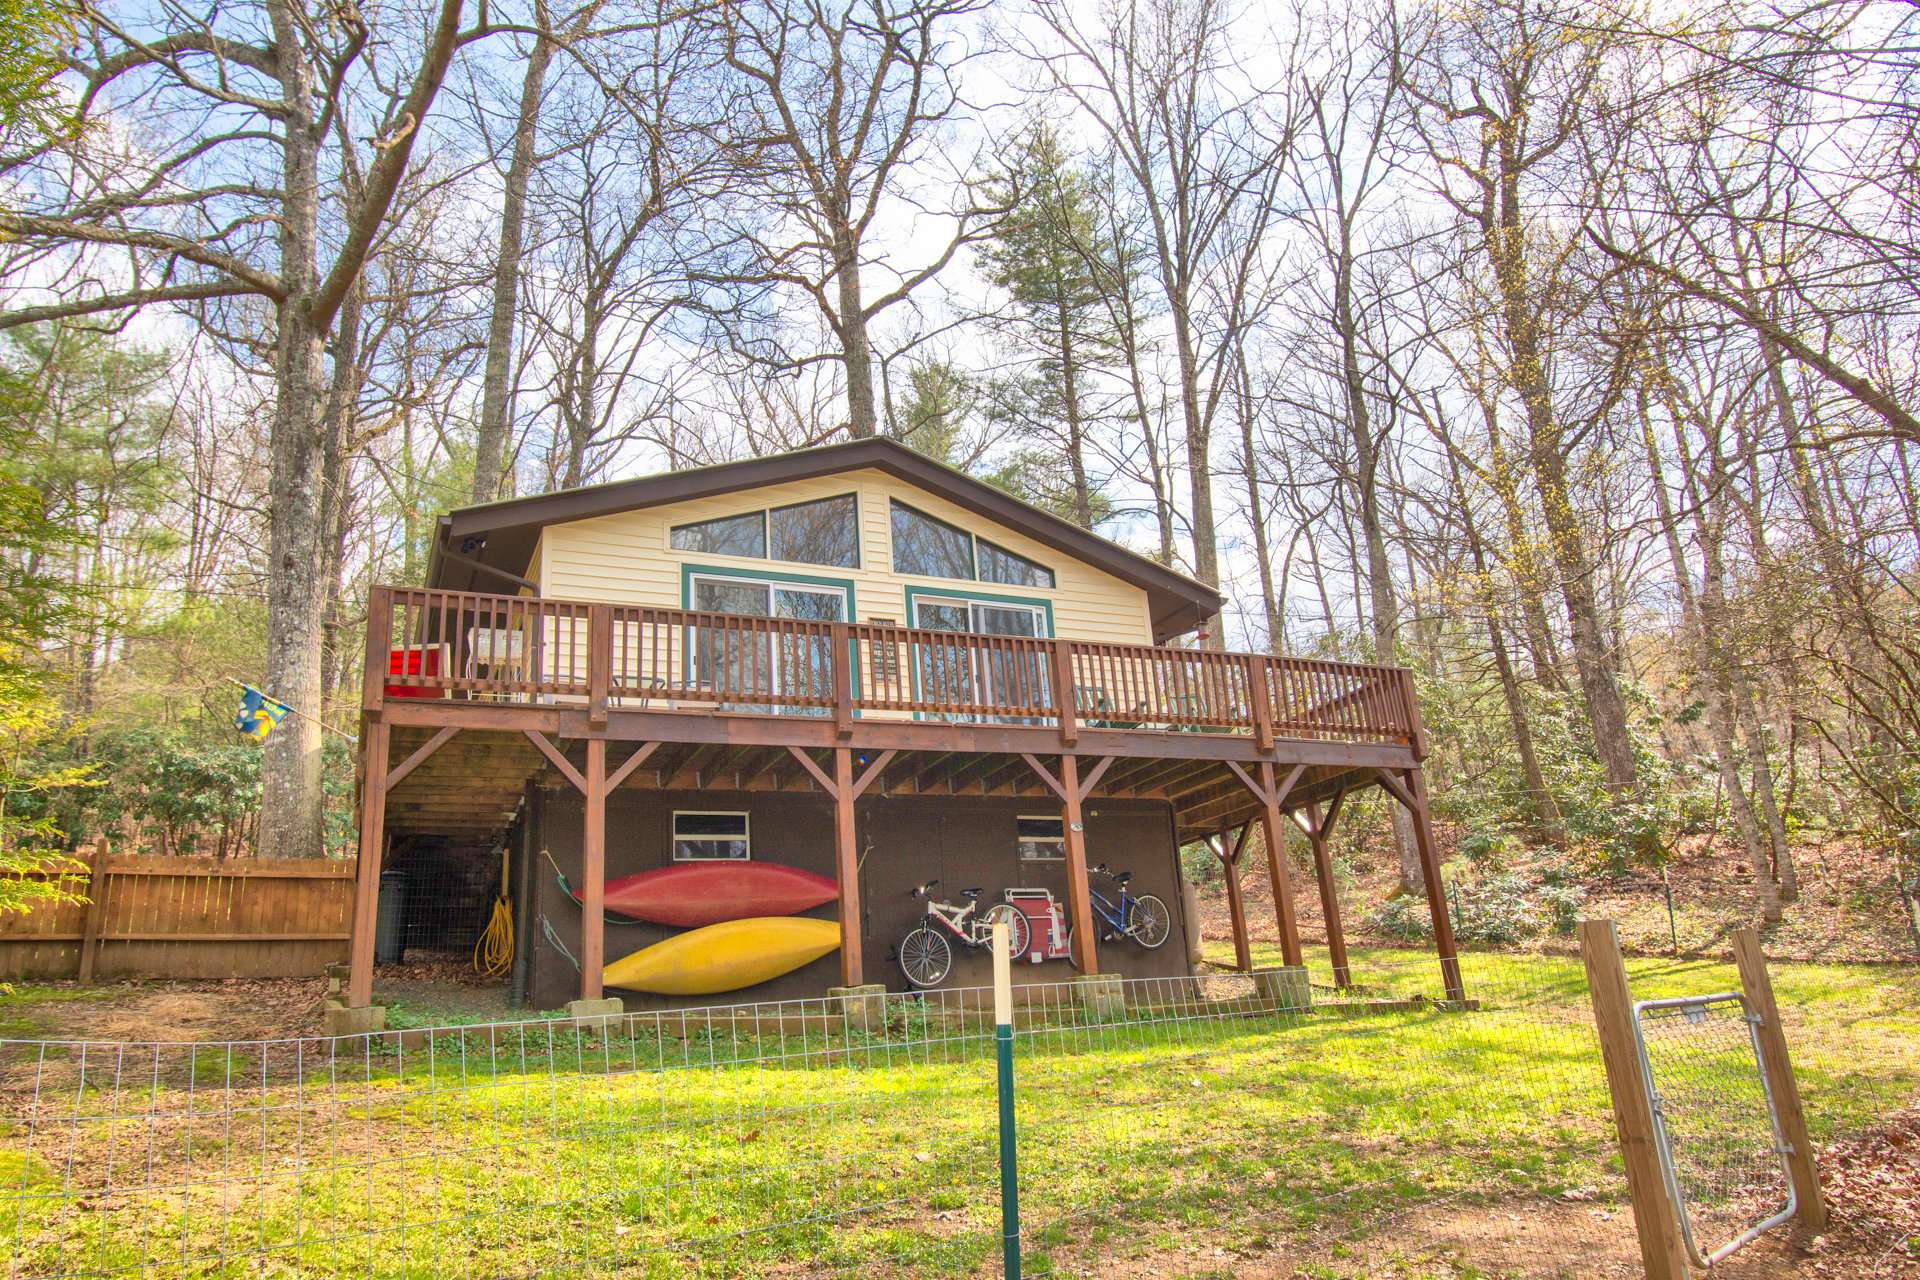 Rustic Acres offers a location that is only 5 miles to Blue Ridge Parkway, 7 miles to West Jefferson and 23 miles to Boone. .